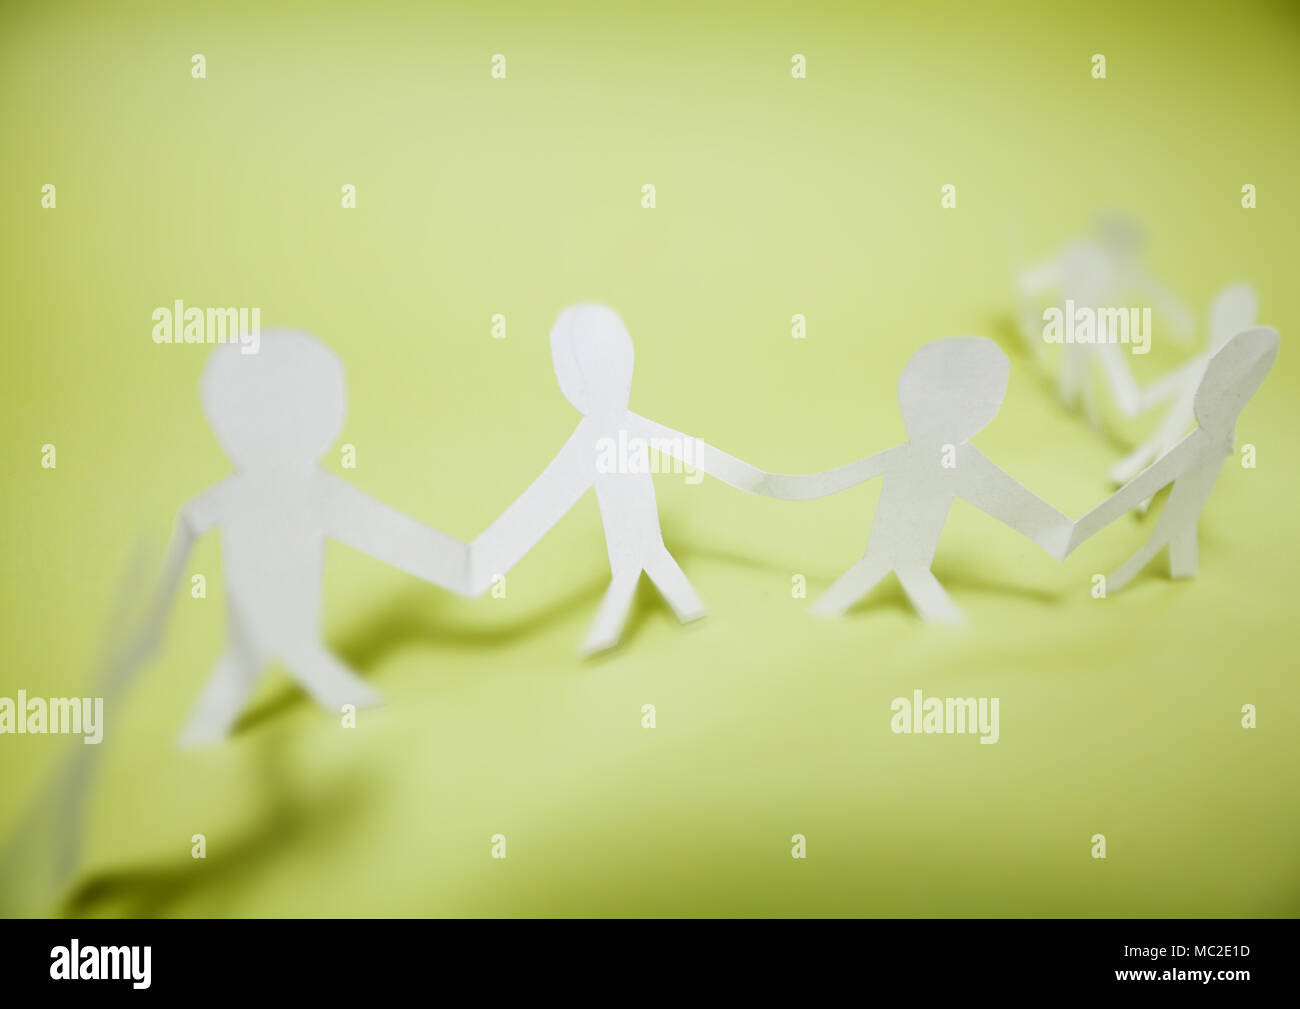 Connected support together, team paper doll people chain Stock Photo